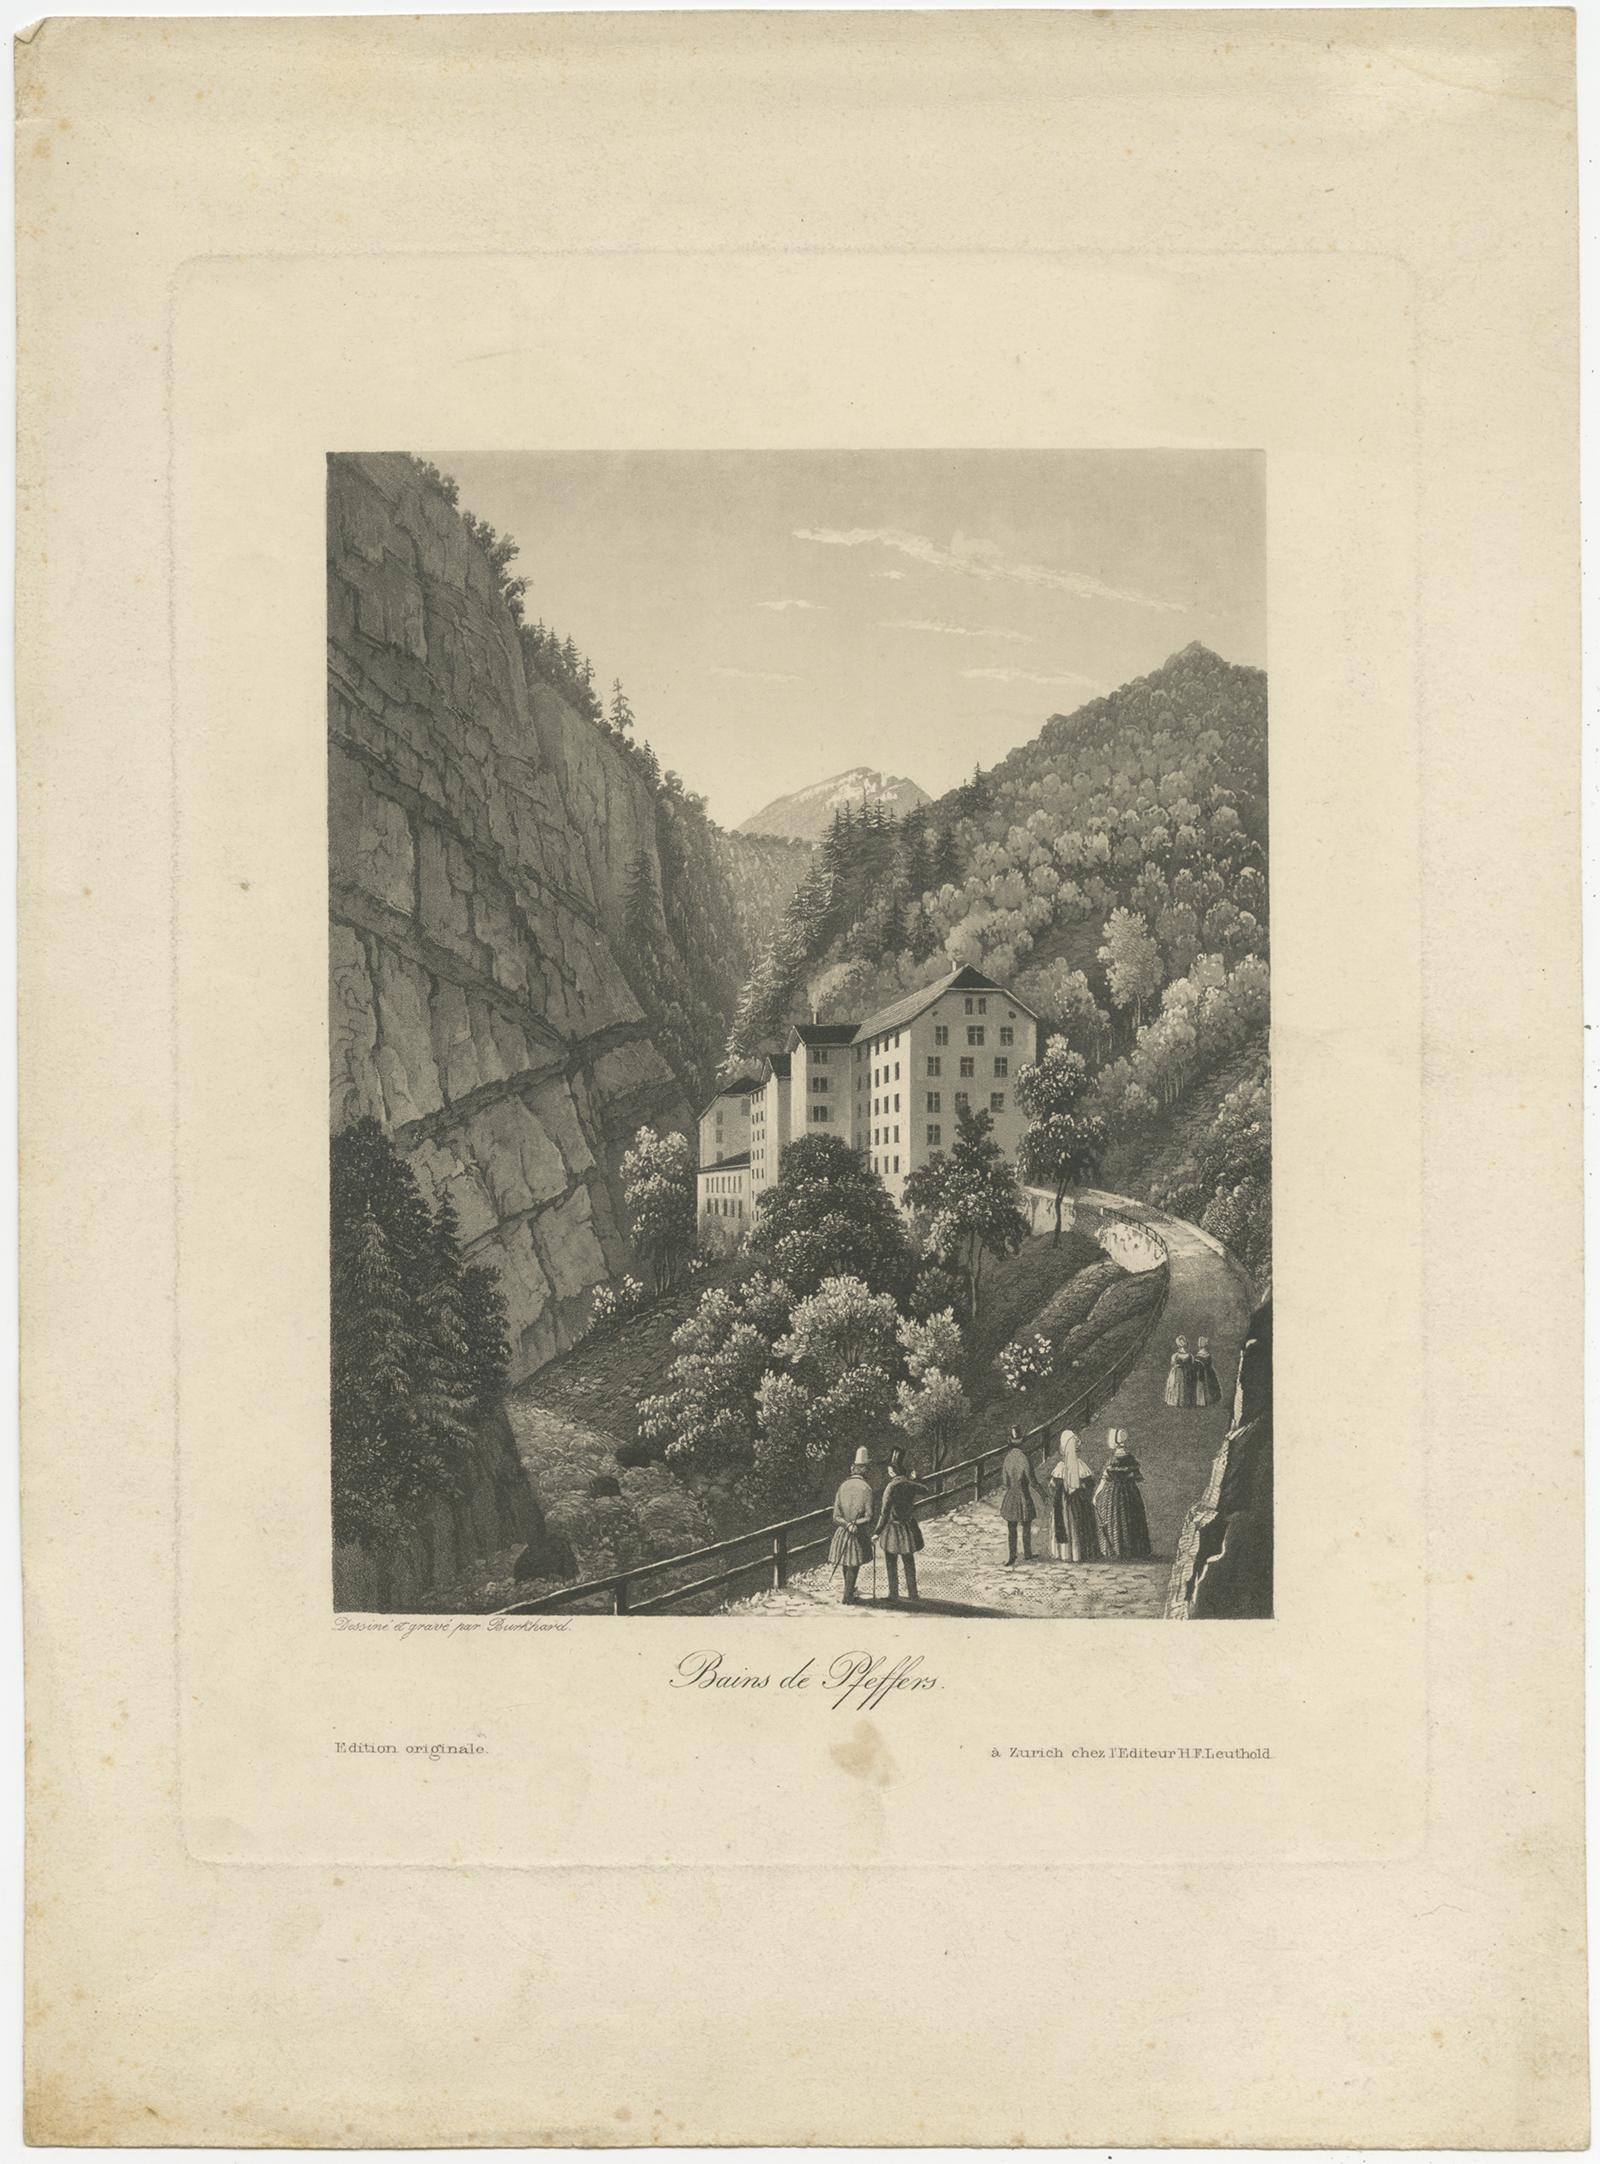 Antique print titled 'Bains de Pfeffers'. View of Pfeffers Baths, Switzerland; figures in foreground walking along a path leading to white houses; pine trees forest and mountains in background. Engraved by Burkhardt. Published by Leuthold, circa